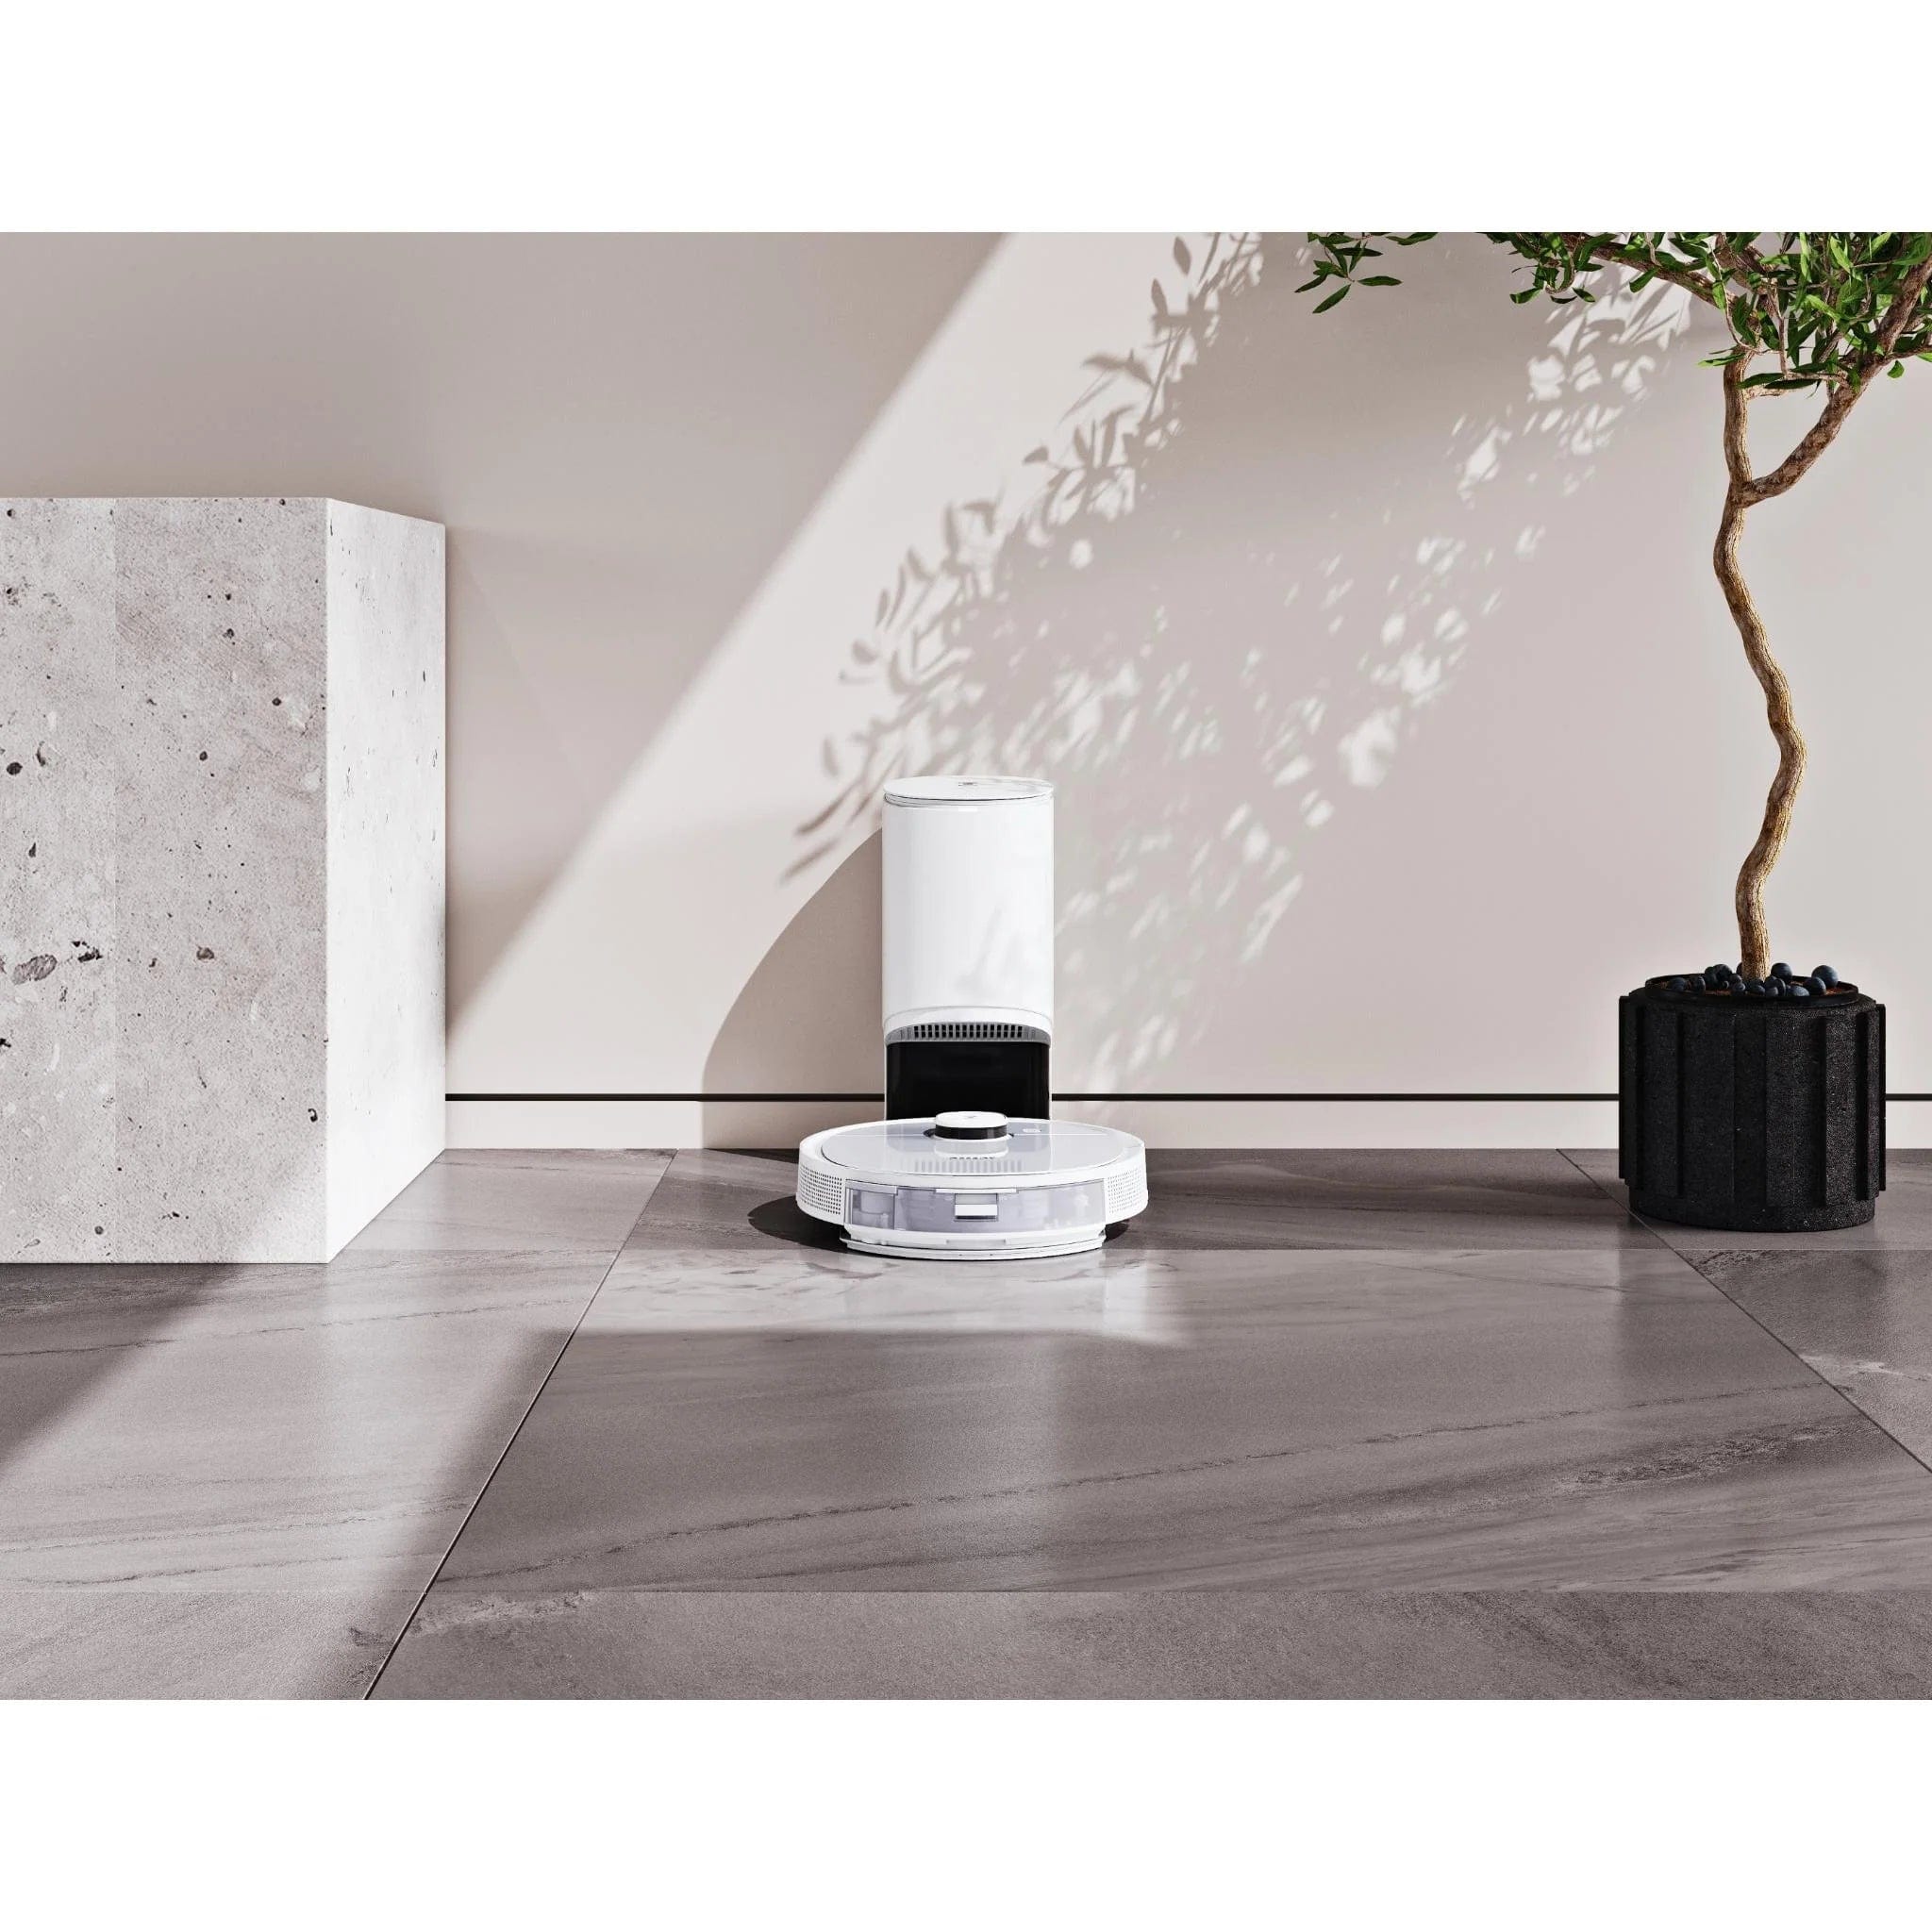 ECOVACS Deebot T9+ Robot Vacuum with Advanced Features